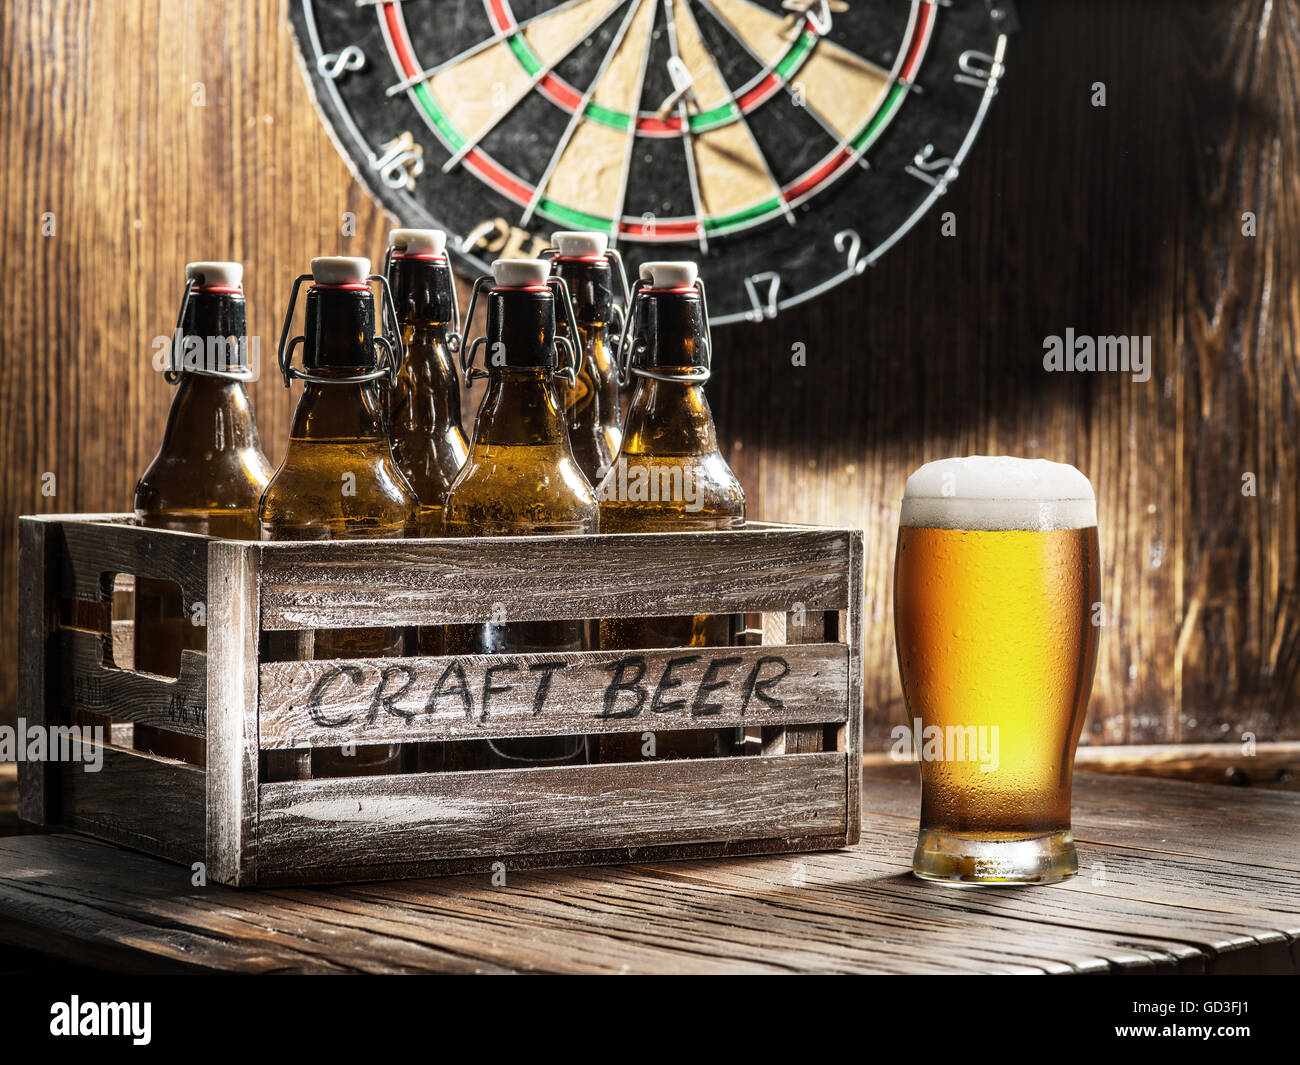 Crafting beer in bottles and glasses. On a wooden wall hangs game of darts. Stock Photo